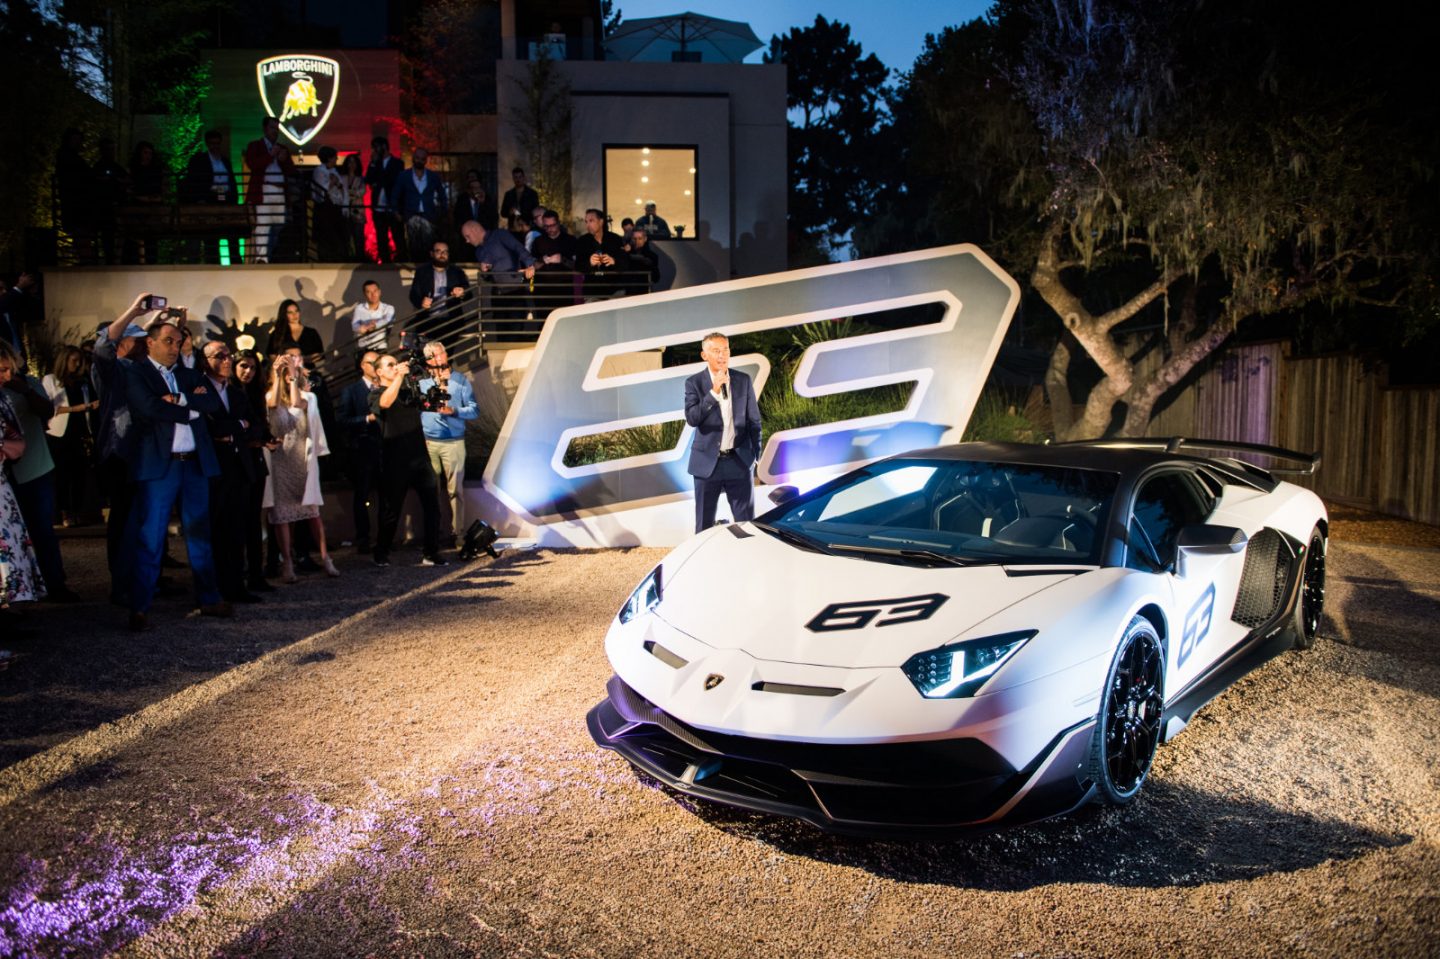 Lamborghini releases Aventador SVJ, a potent 781 PS flagship with a Nürburgring lap record